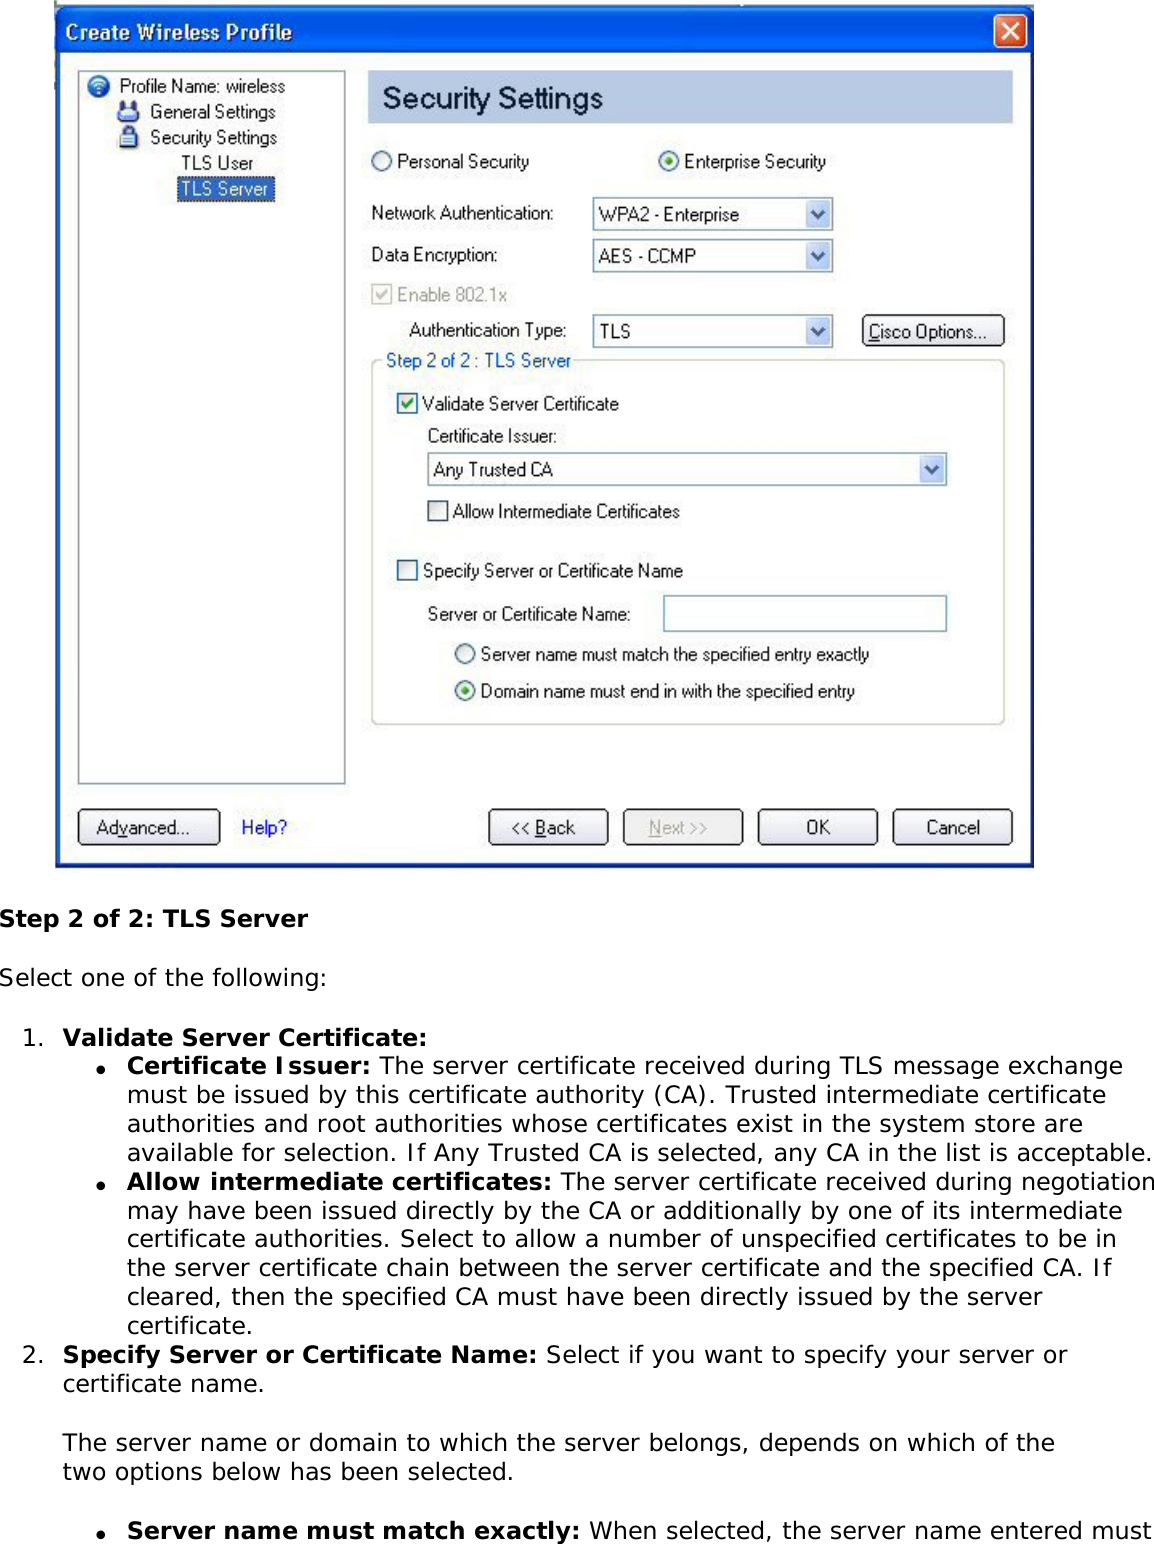  Step 2 of 2: TLS ServerSelect one of the following: 1.  Validate Server Certificate: ●     Certificate Issuer: The server certificate received during TLS message exchange must be issued by this certificate authority (CA). Trusted intermediate certificate authorities and root authorities whose certificates exist in the system store are available for selection. If Any Trusted CA is selected, any CA in the list is acceptable. ●     Allow intermediate certificates: The server certificate received during negotiation may have been issued directly by the CA or additionally by one of its intermediate certificate authorities. Select to allow a number of unspecified certificates to be in the server certificate chain between the server certificate and the specified CA. If cleared, then the specified CA must have been directly issued by the server certificate. 2.  Specify Server or Certificate Name: Select if you want to specify your server or certificate name. The server name or domain to which the server belongs, depends on which of the two options below has been selected. ●     Server name must match exactly: When selected, the server name entered must 